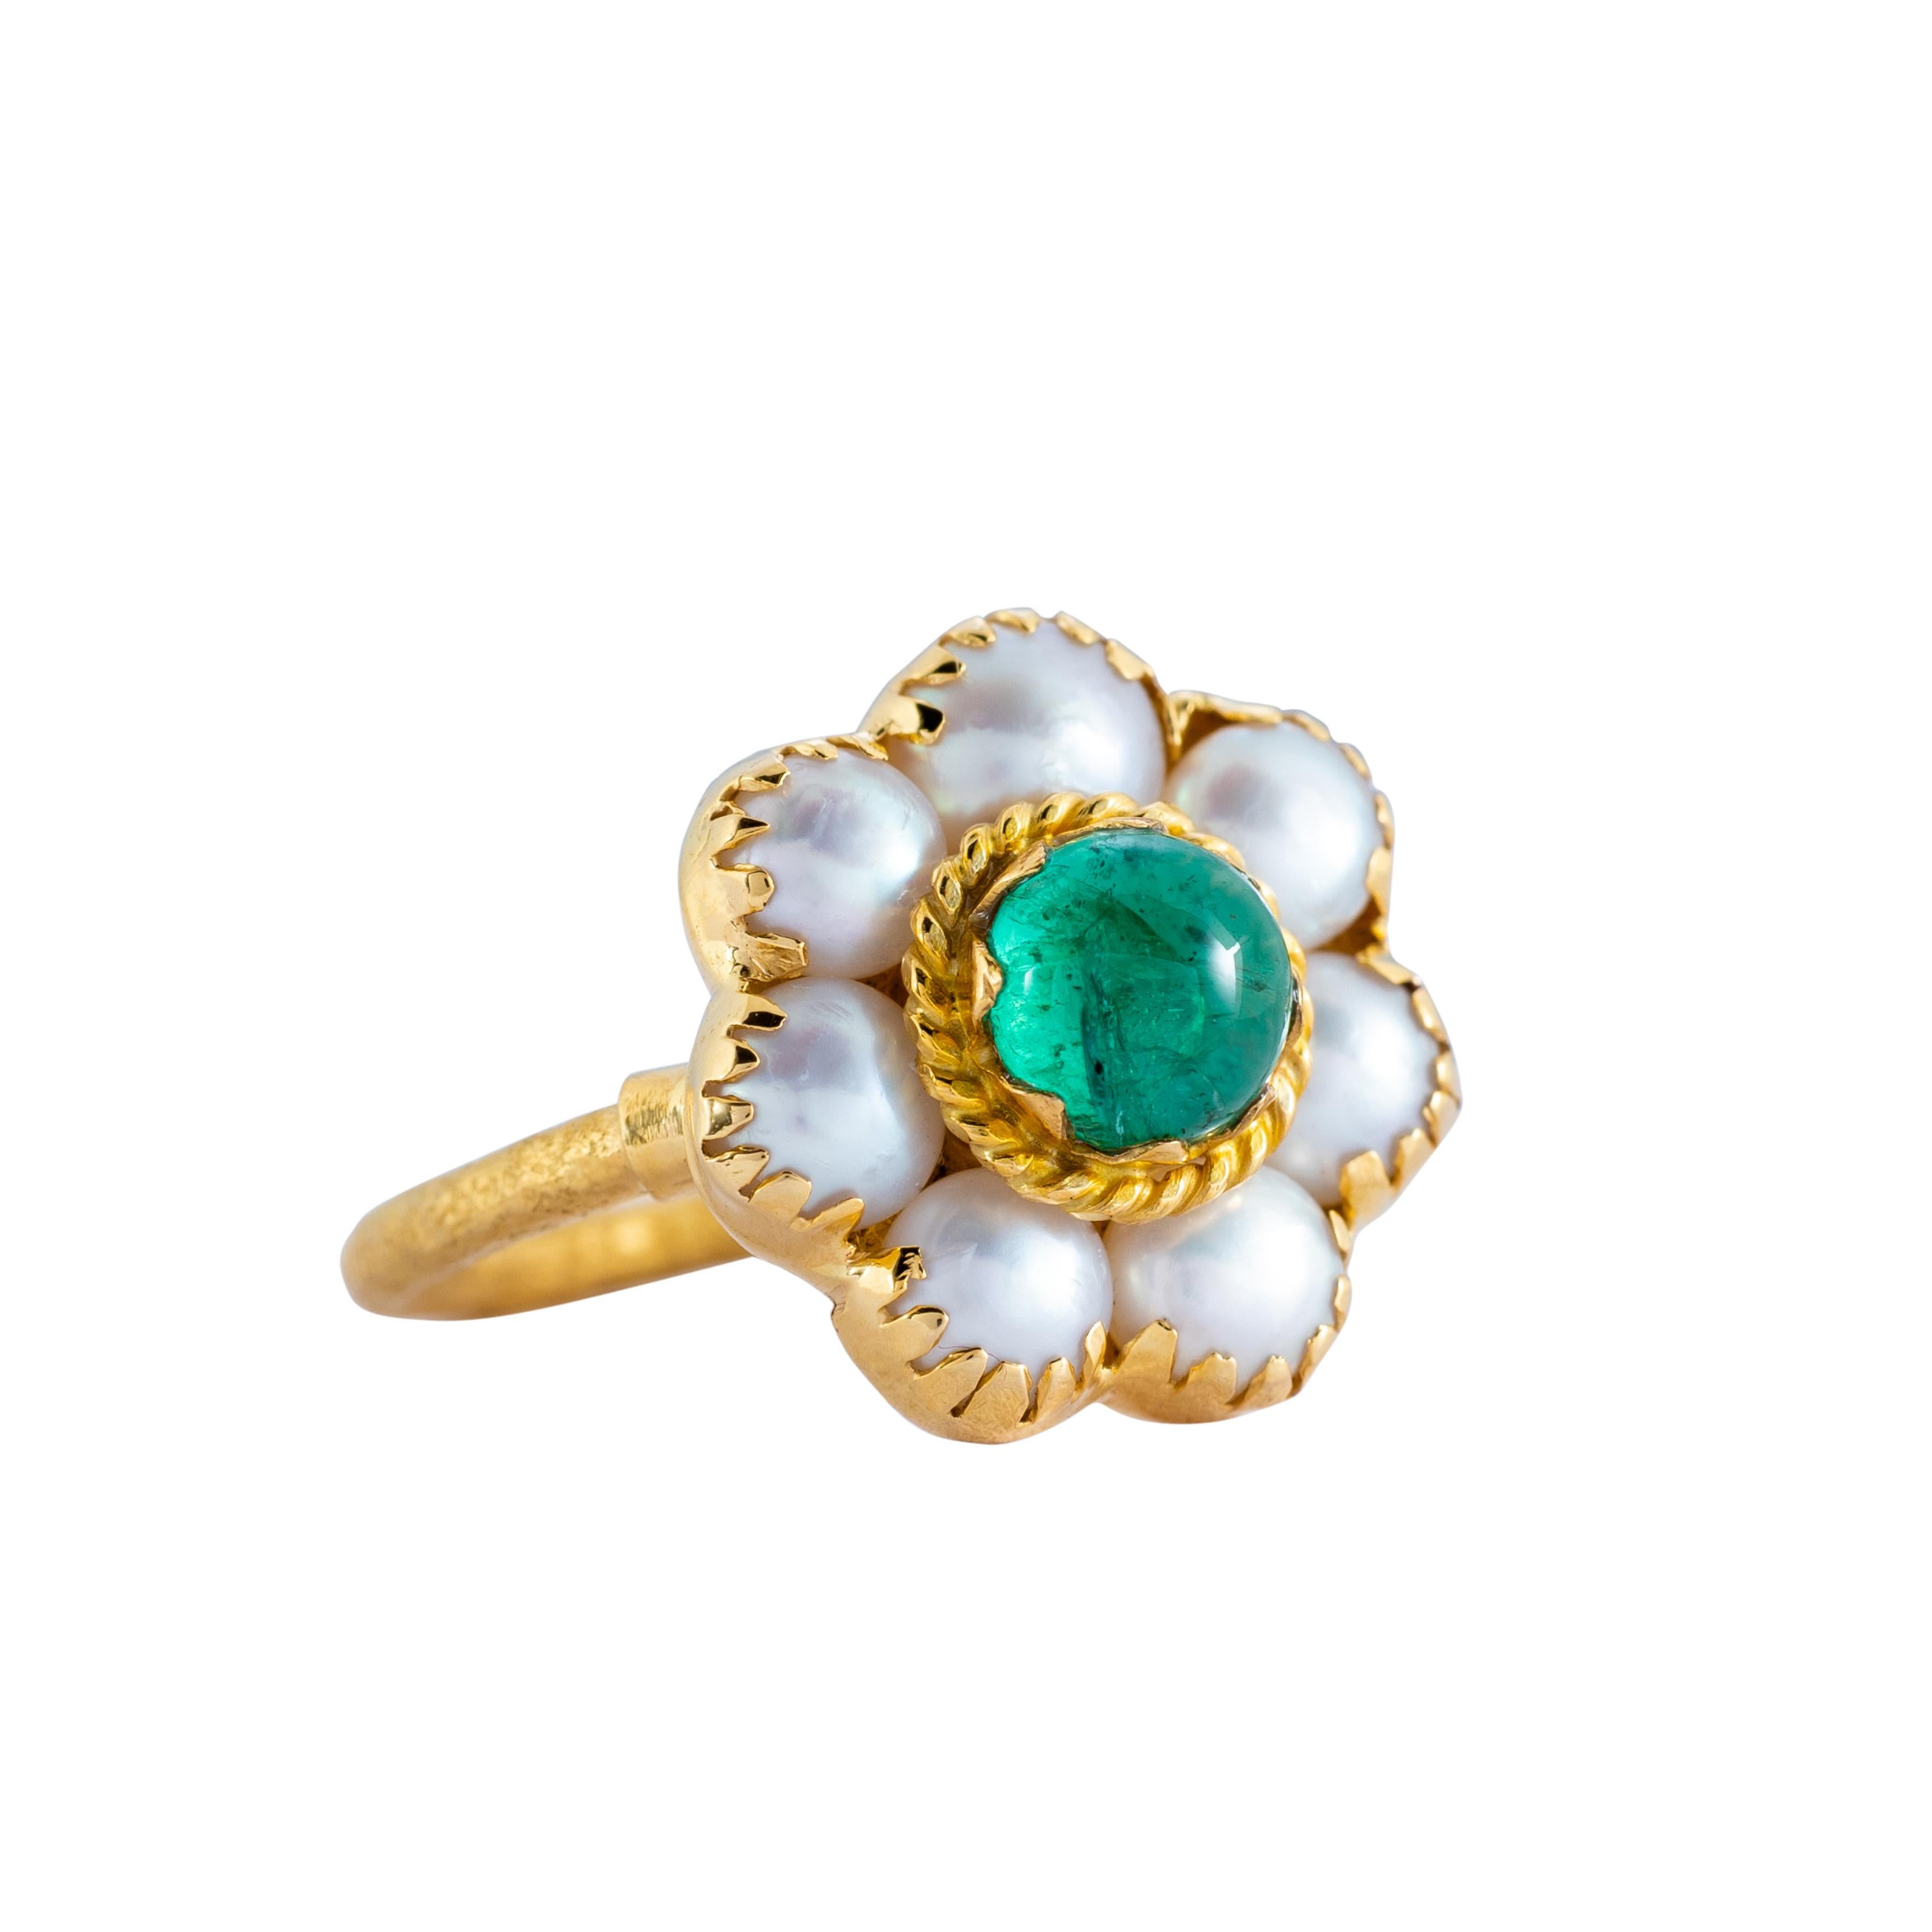 The exquisite Emerald Pearl 18k Gold Cluster Ring has been handmade in our workshops and is one-of-a-kind. It features a cabochon emerald in the centre which is flanked by pearls, and is set in 18k gold with detailed hand-engraving work.

Dimensions